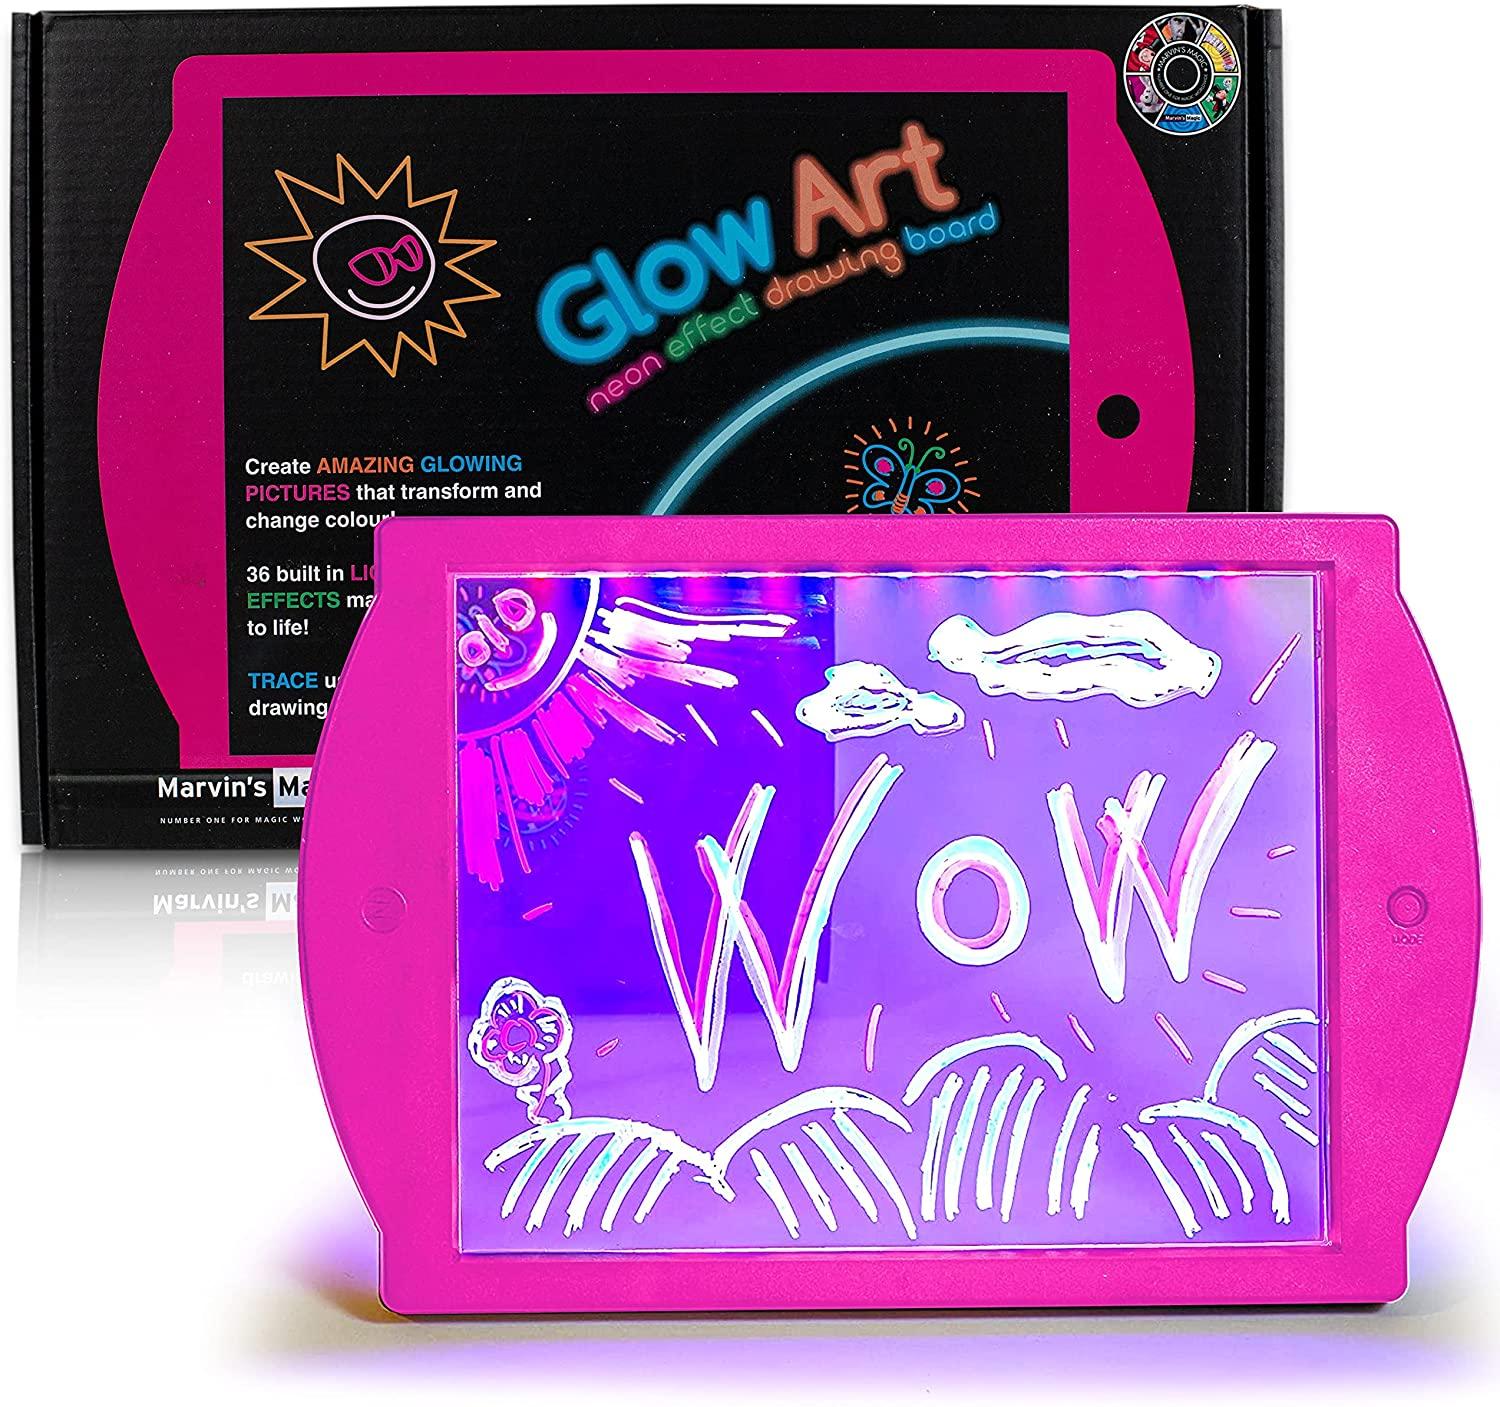 Details about   Glow and play light up pegs by Creative Kids 